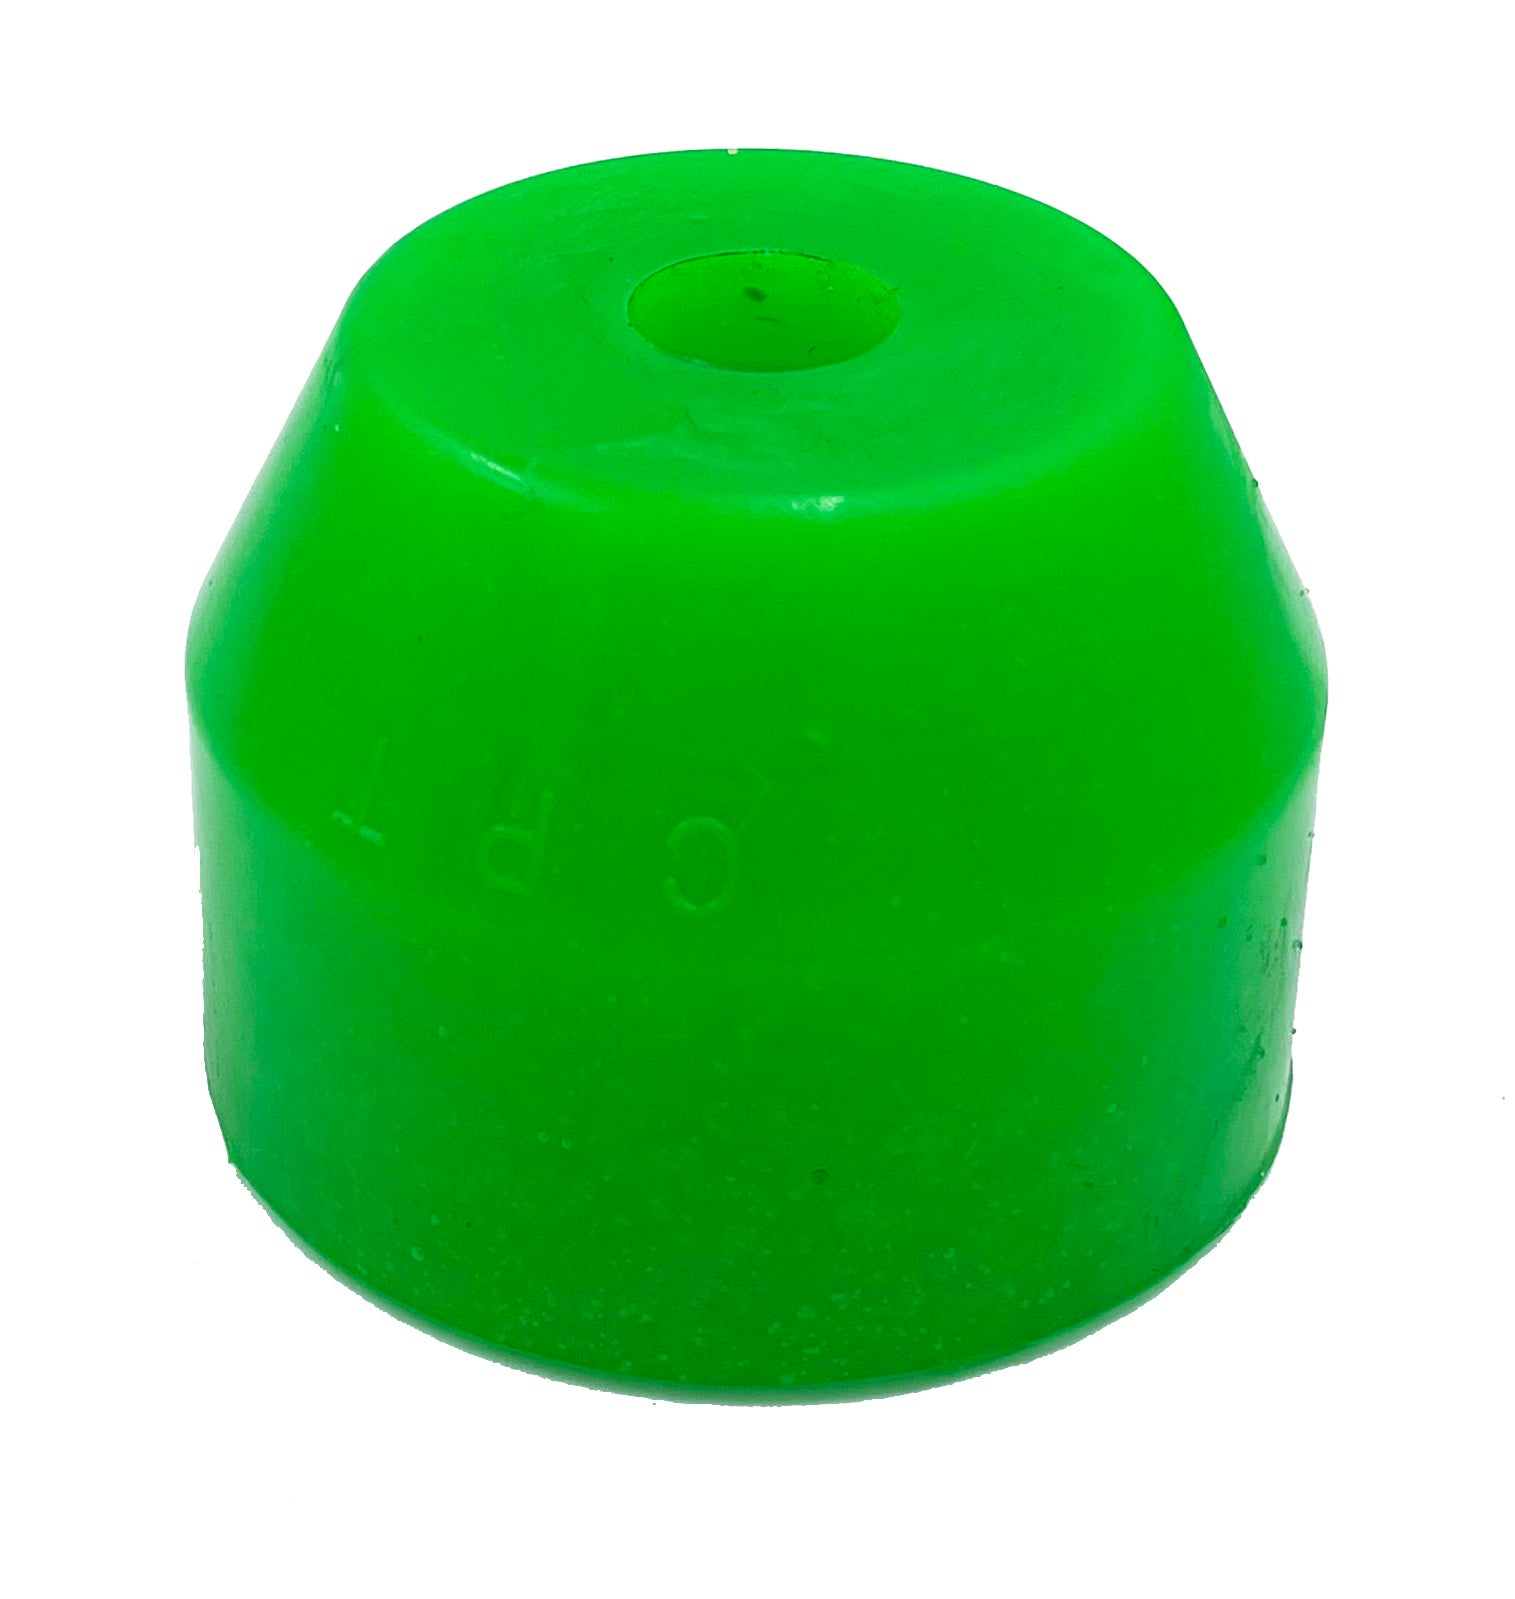 GREEN - SOFT BISCUIT - Part#: CPT-8310